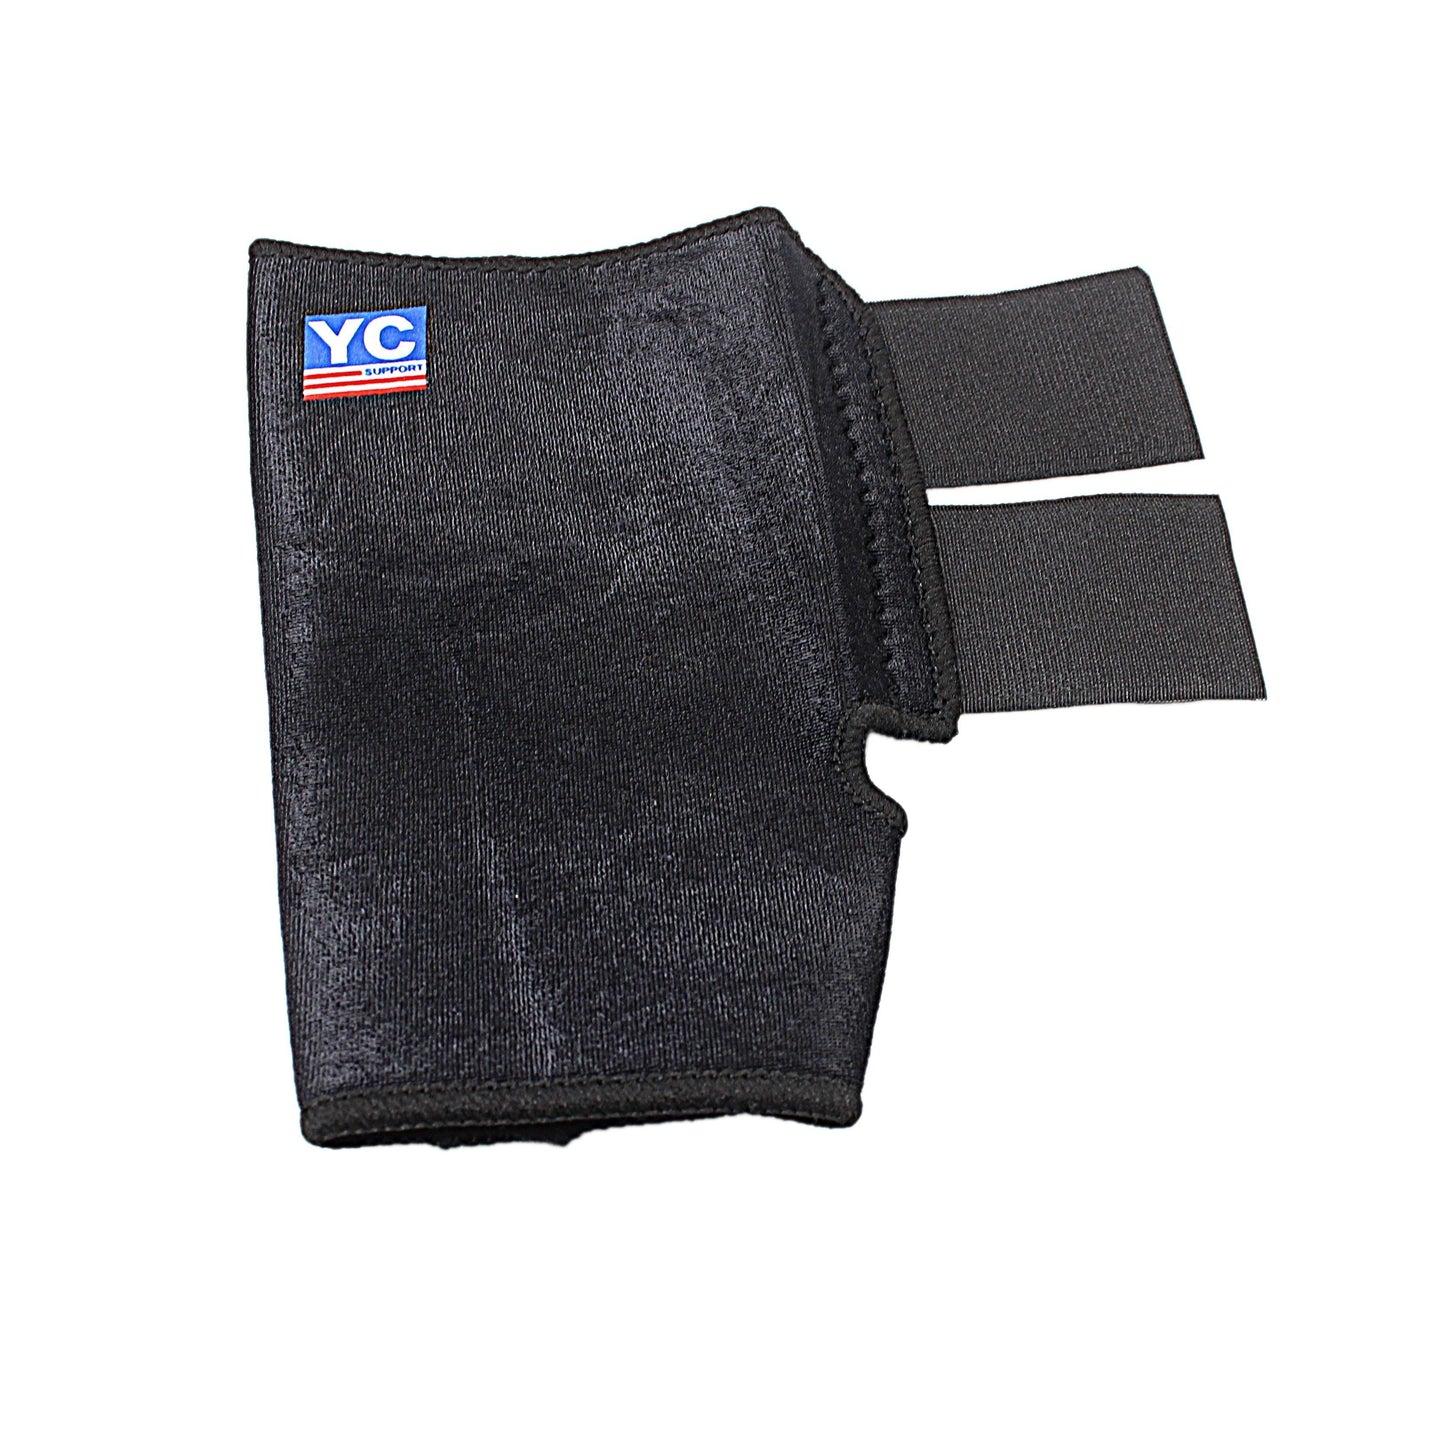 Ankle Support Provides Support And Compression 9992 (Large Letter Rate)